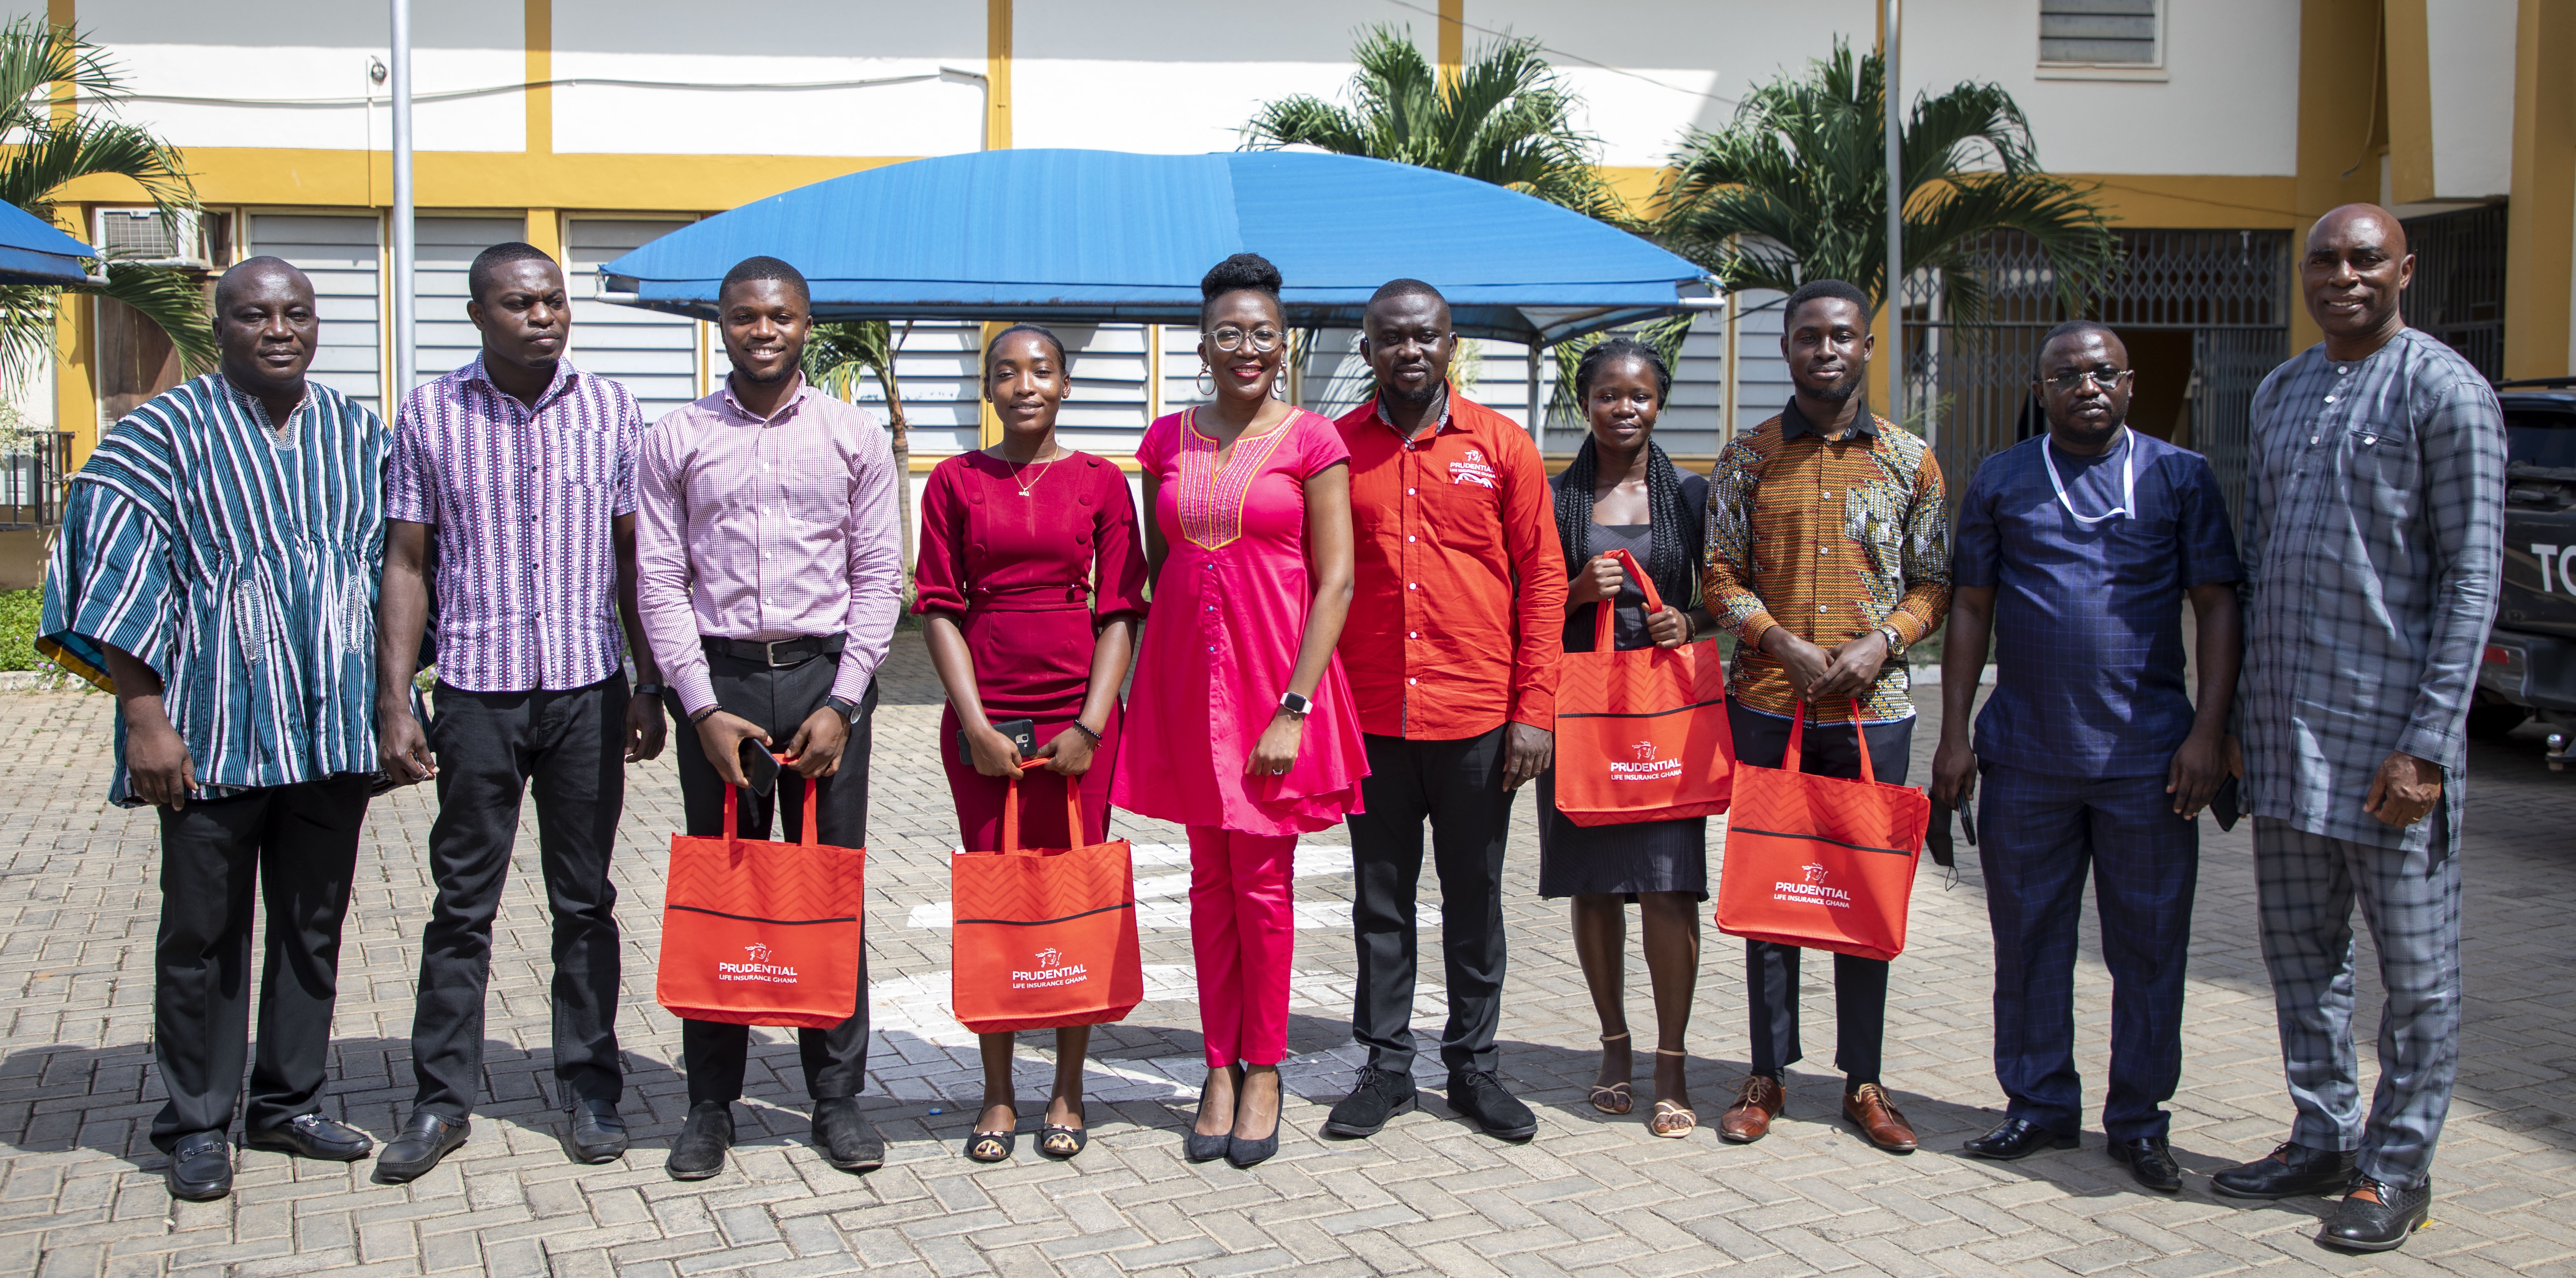 PRUDENTIAL LIFE INSURANCE AWARDS TOP 5 STUDENTS IN ACTUARIAL SCIENCE